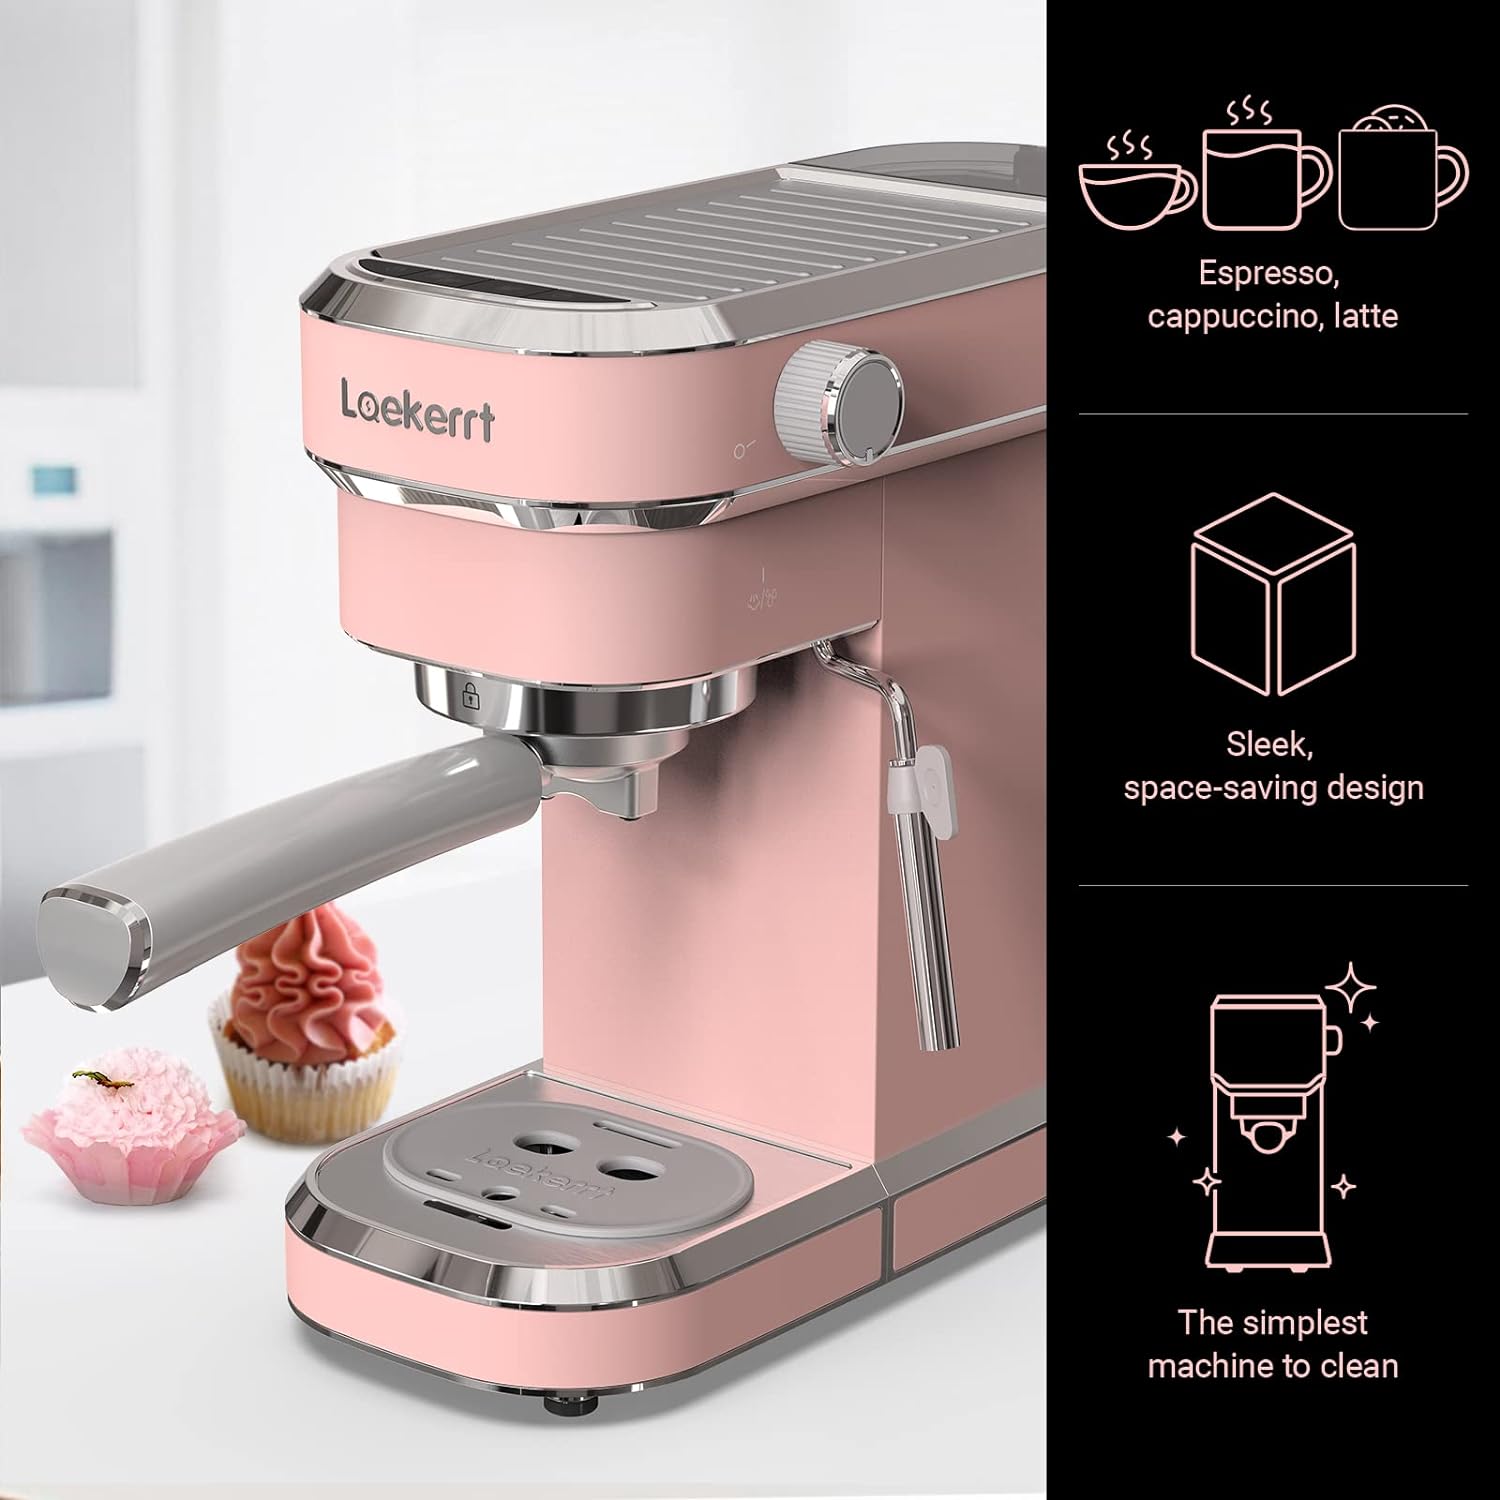 Laekerrt Professional Espresso Machine 20 Bar, Espresso Maker with Milk Frother Steam Wand, Stainless Steel Home Coffee Machines for Cappuccino and Latte, Gift for Women Wife Daughter or Mom, Pink